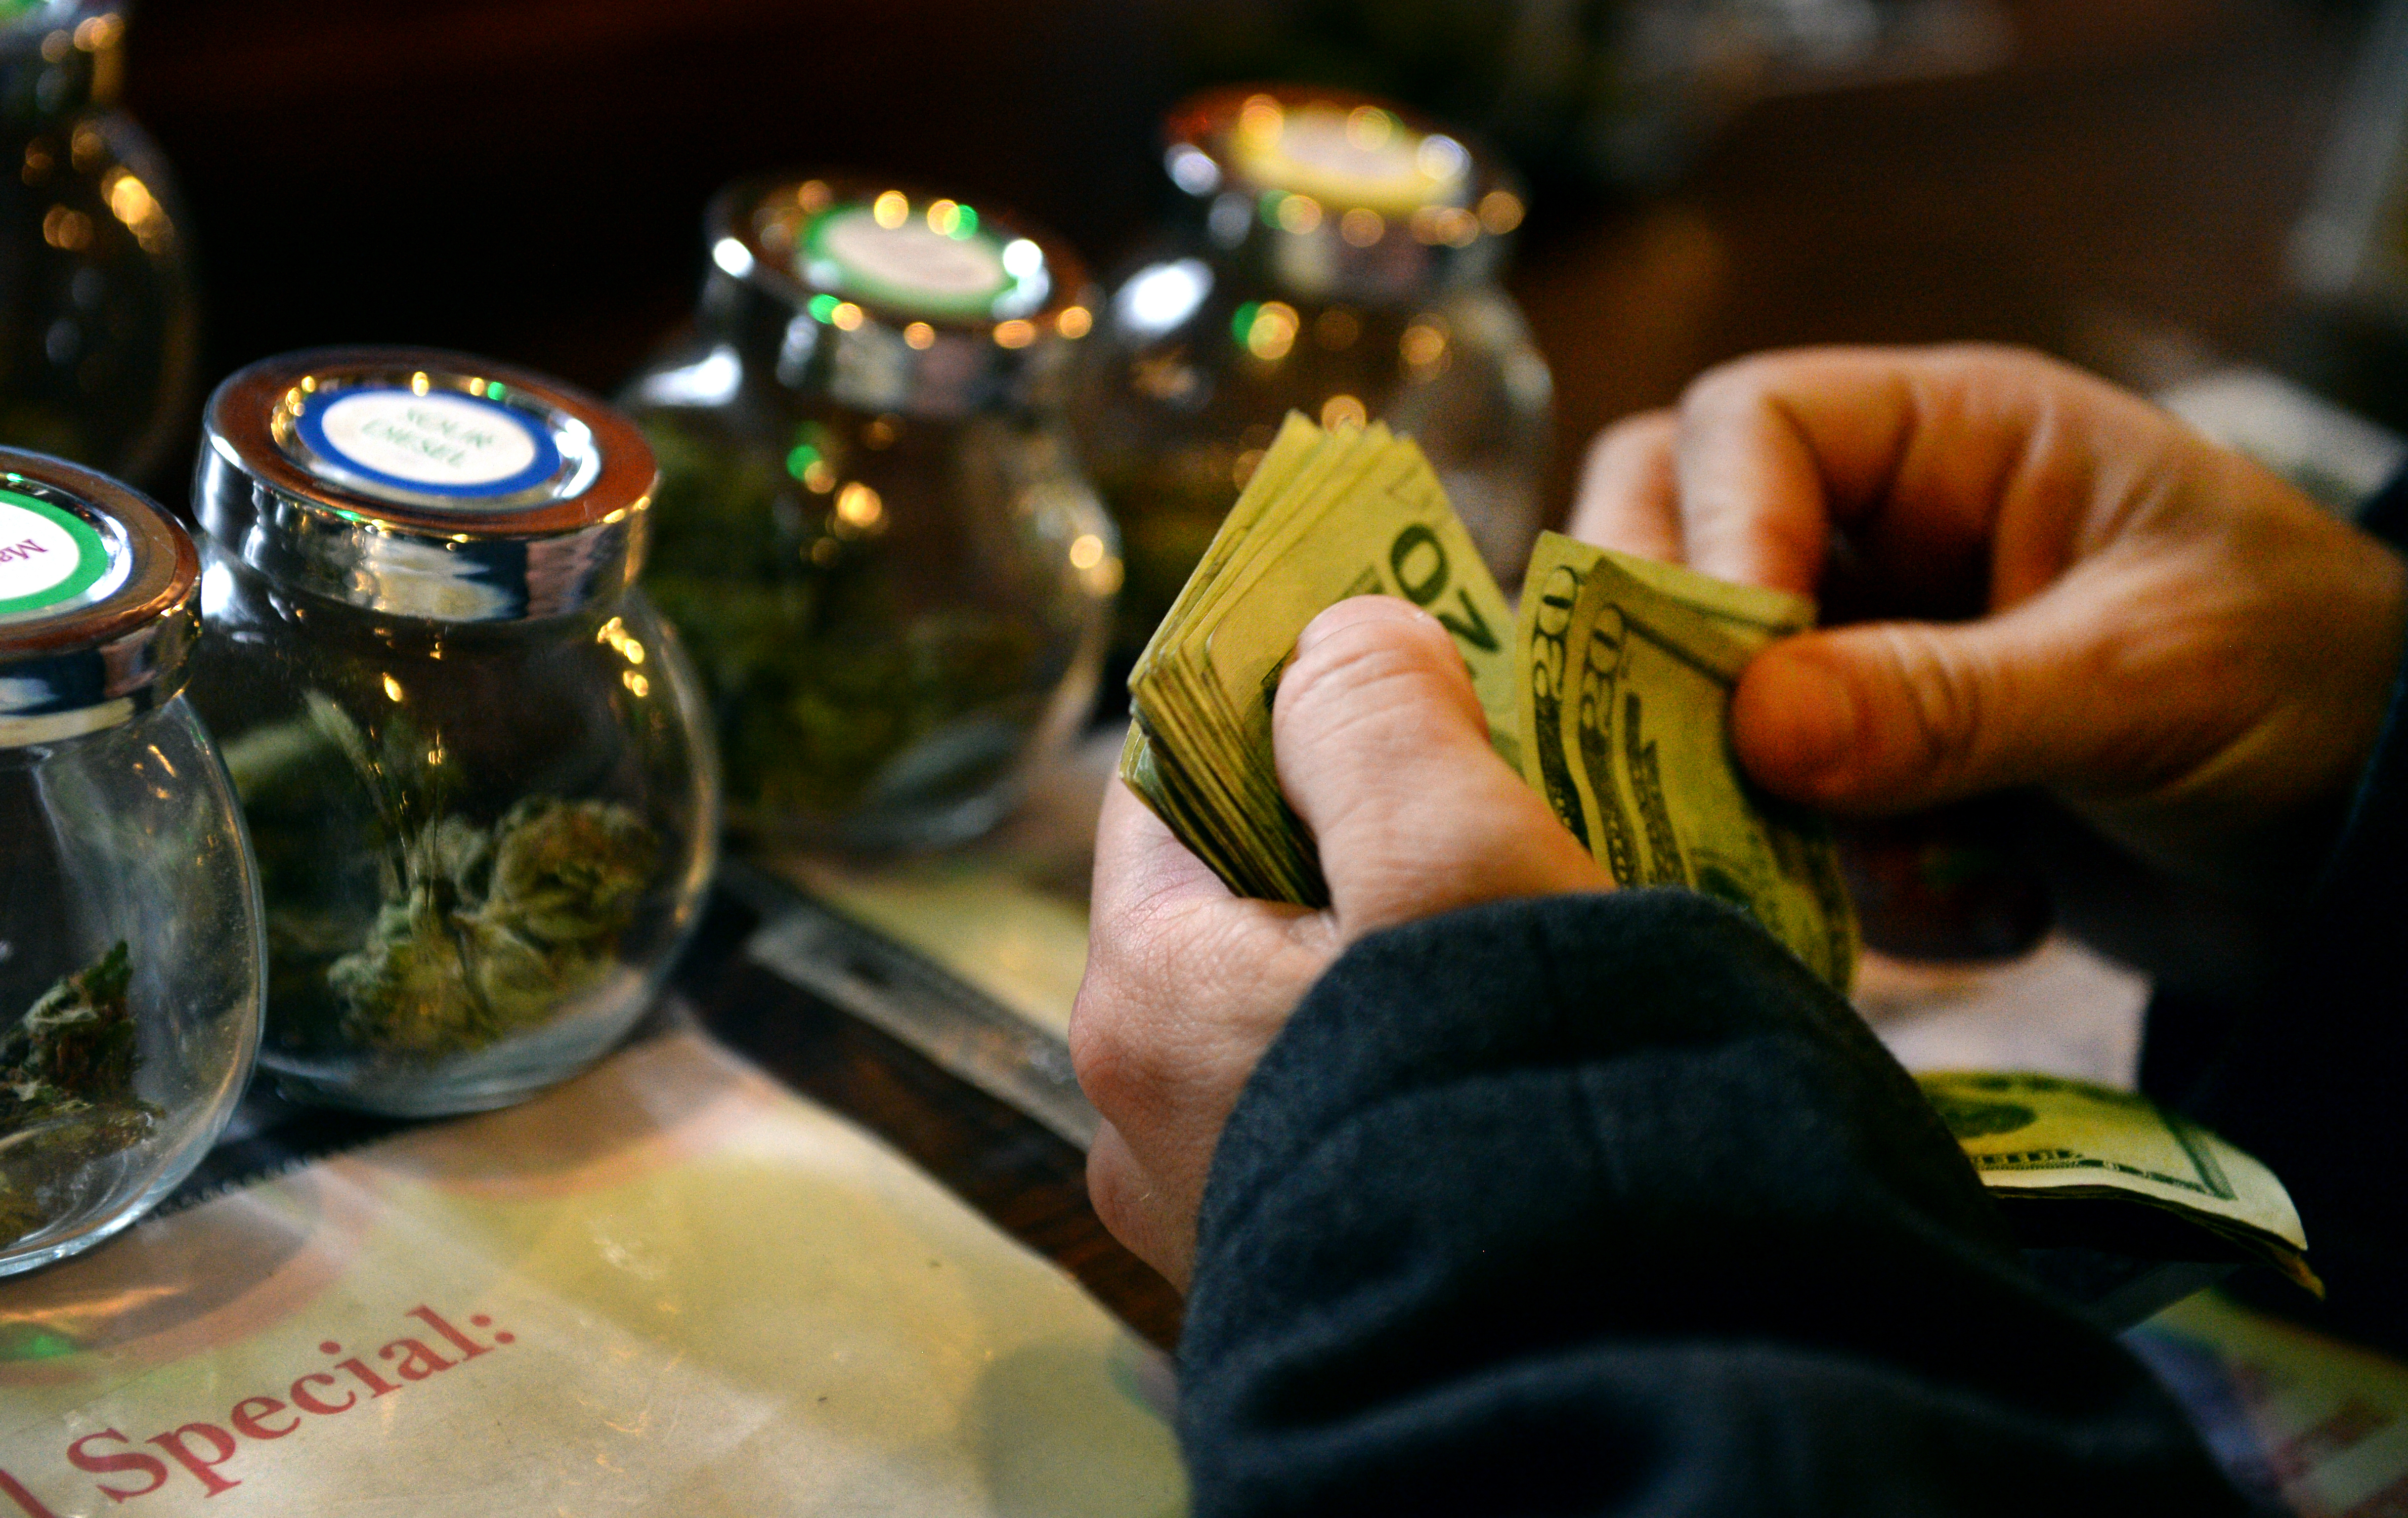 A tour member purchases marijuana at La Conte's Clone Bar &amp; Dispensary during a marijuana tour in Denver on Dec. 6, 2014 (Craig F. Walker—The Denver Post/MediaNews Group/Getty Images)